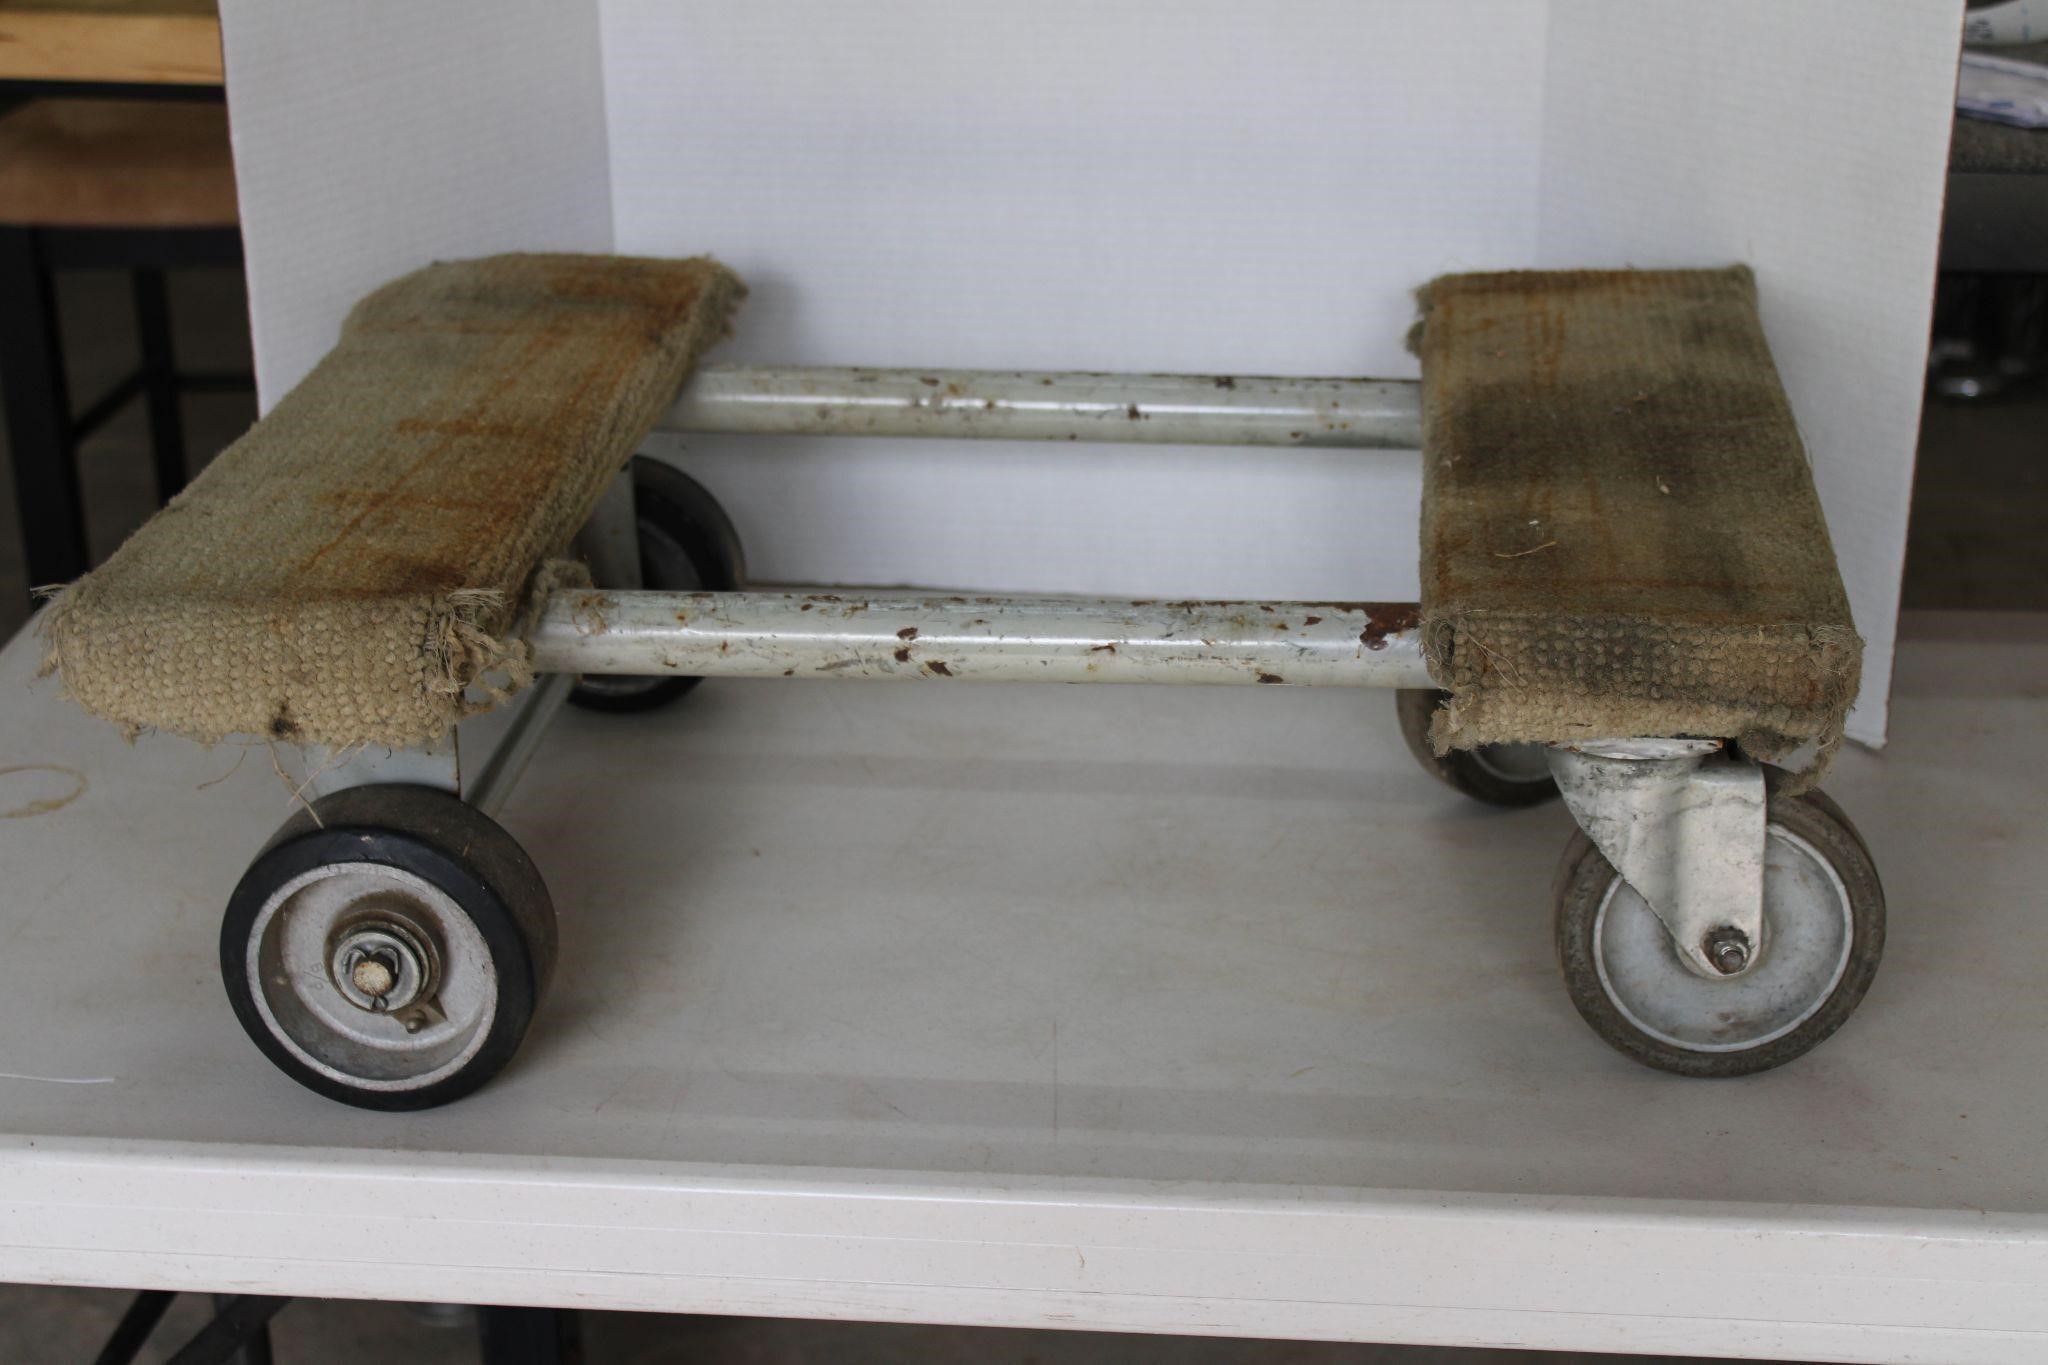 4 Wheel Furniture Dolly 4" Tires